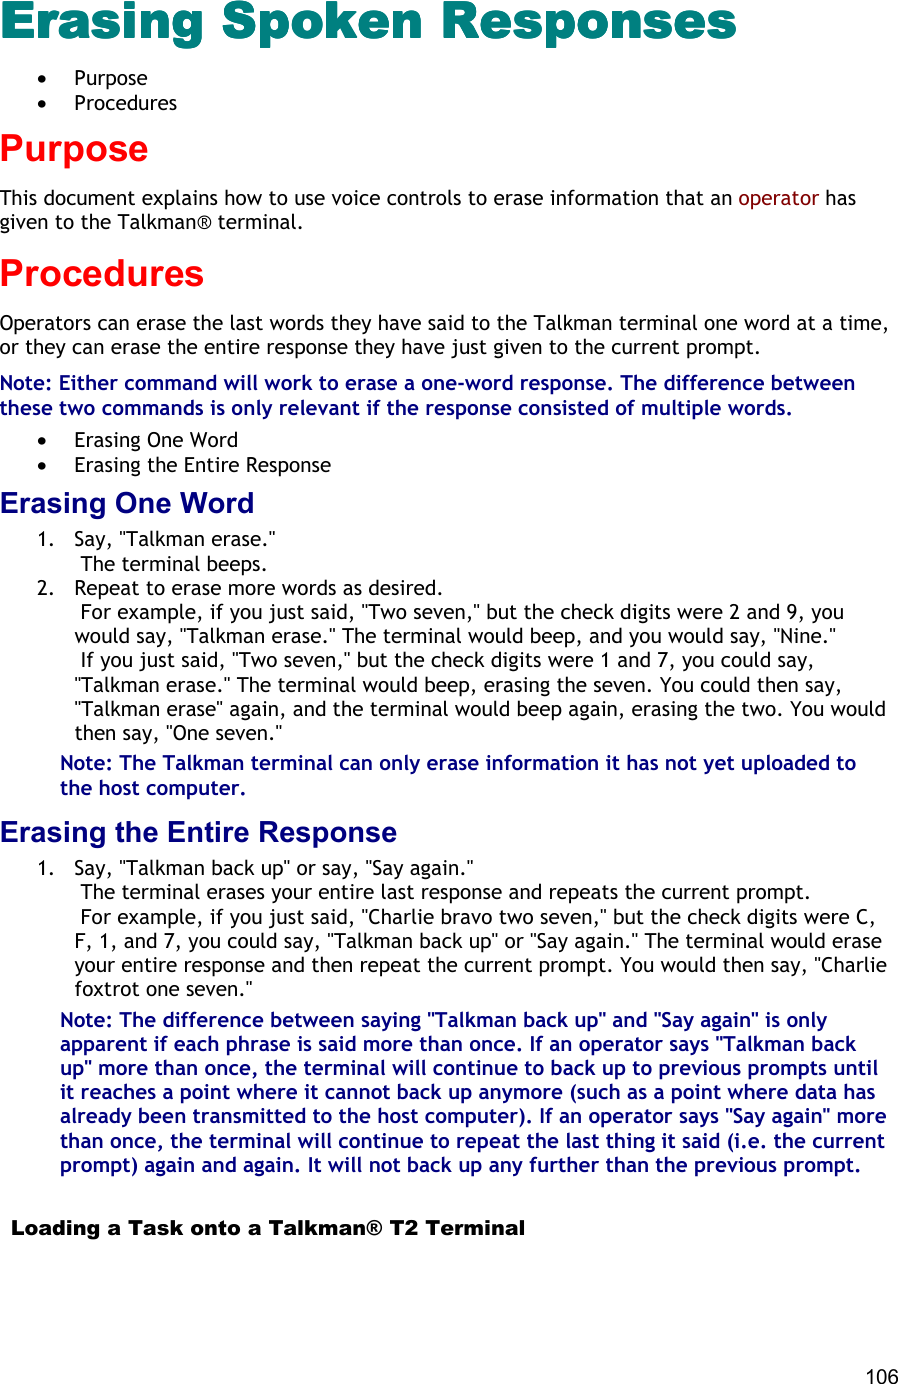  106 Erasing Spoken ResponsesErasing Spoken ResponsesErasing Spoken ResponsesErasing Spoken Responses •  Purpose •  Procedures Purpose This document explains how to use voice controls to erase information that an operator has given to the Talkman® terminal. Procedures Operators can erase the last words they have said to the Talkman terminal one word at a time, or they can erase the entire response they have just given to the current prompt. Note: Either command will work to erase a one-word response. The difference between these two commands is only relevant if the response consisted of multiple words.  •  Erasing One Word •  Erasing the Entire Response Erasing One Word 1.  Say, &quot;Talkman erase.&quot;  The terminal beeps. 2.  Repeat to erase more words as desired.  For example, if you just said, &quot;Two seven,&quot; but the check digits were 2 and 9, you would say, &quot;Talkman erase.&quot; The terminal would beep, and you would say, &quot;Nine.&quot;  If you just said, &quot;Two seven,&quot; but the check digits were 1 and 7, you could say, &quot;Talkman erase.&quot; The terminal would beep, erasing the seven. You could then say, &quot;Talkman erase&quot; again, and the terminal would beep again, erasing the two. You would then say, &quot;One seven.&quot; Note: The Talkman terminal can only erase information it has not yet uploaded to the host computer. Erasing the Entire Response 1.  Say, &quot;Talkman back up&quot; or say, &quot;Say again.&quot;  The terminal erases your entire last response and repeats the current prompt.  For example, if you just said, &quot;Charlie bravo two seven,&quot; but the check digits were C, F, 1, and 7, you could say, &quot;Talkman back up&quot; or &quot;Say again.&quot; The terminal would erase your entire response and then repeat the current prompt. You would then say, &quot;Charlie foxtrot one seven.&quot; Note: The difference between saying &quot;Talkman back up&quot; and &quot;Say again&quot; is only apparent if each phrase is said more than once. If an operator says &quot;Talkman back up&quot; more than once, the terminal will continue to back up to previous prompts until it reaches a point where it cannot back up anymore (such as a point where data has already been transmitted to the host computer). If an operator says &quot;Say again&quot; more than once, the terminal will continue to repeat the last thing it said (i.e. the current prompt) again and again. It will not back up any further than the previous prompt.    Loading a Task onto a Talkman® T2 Terminal 